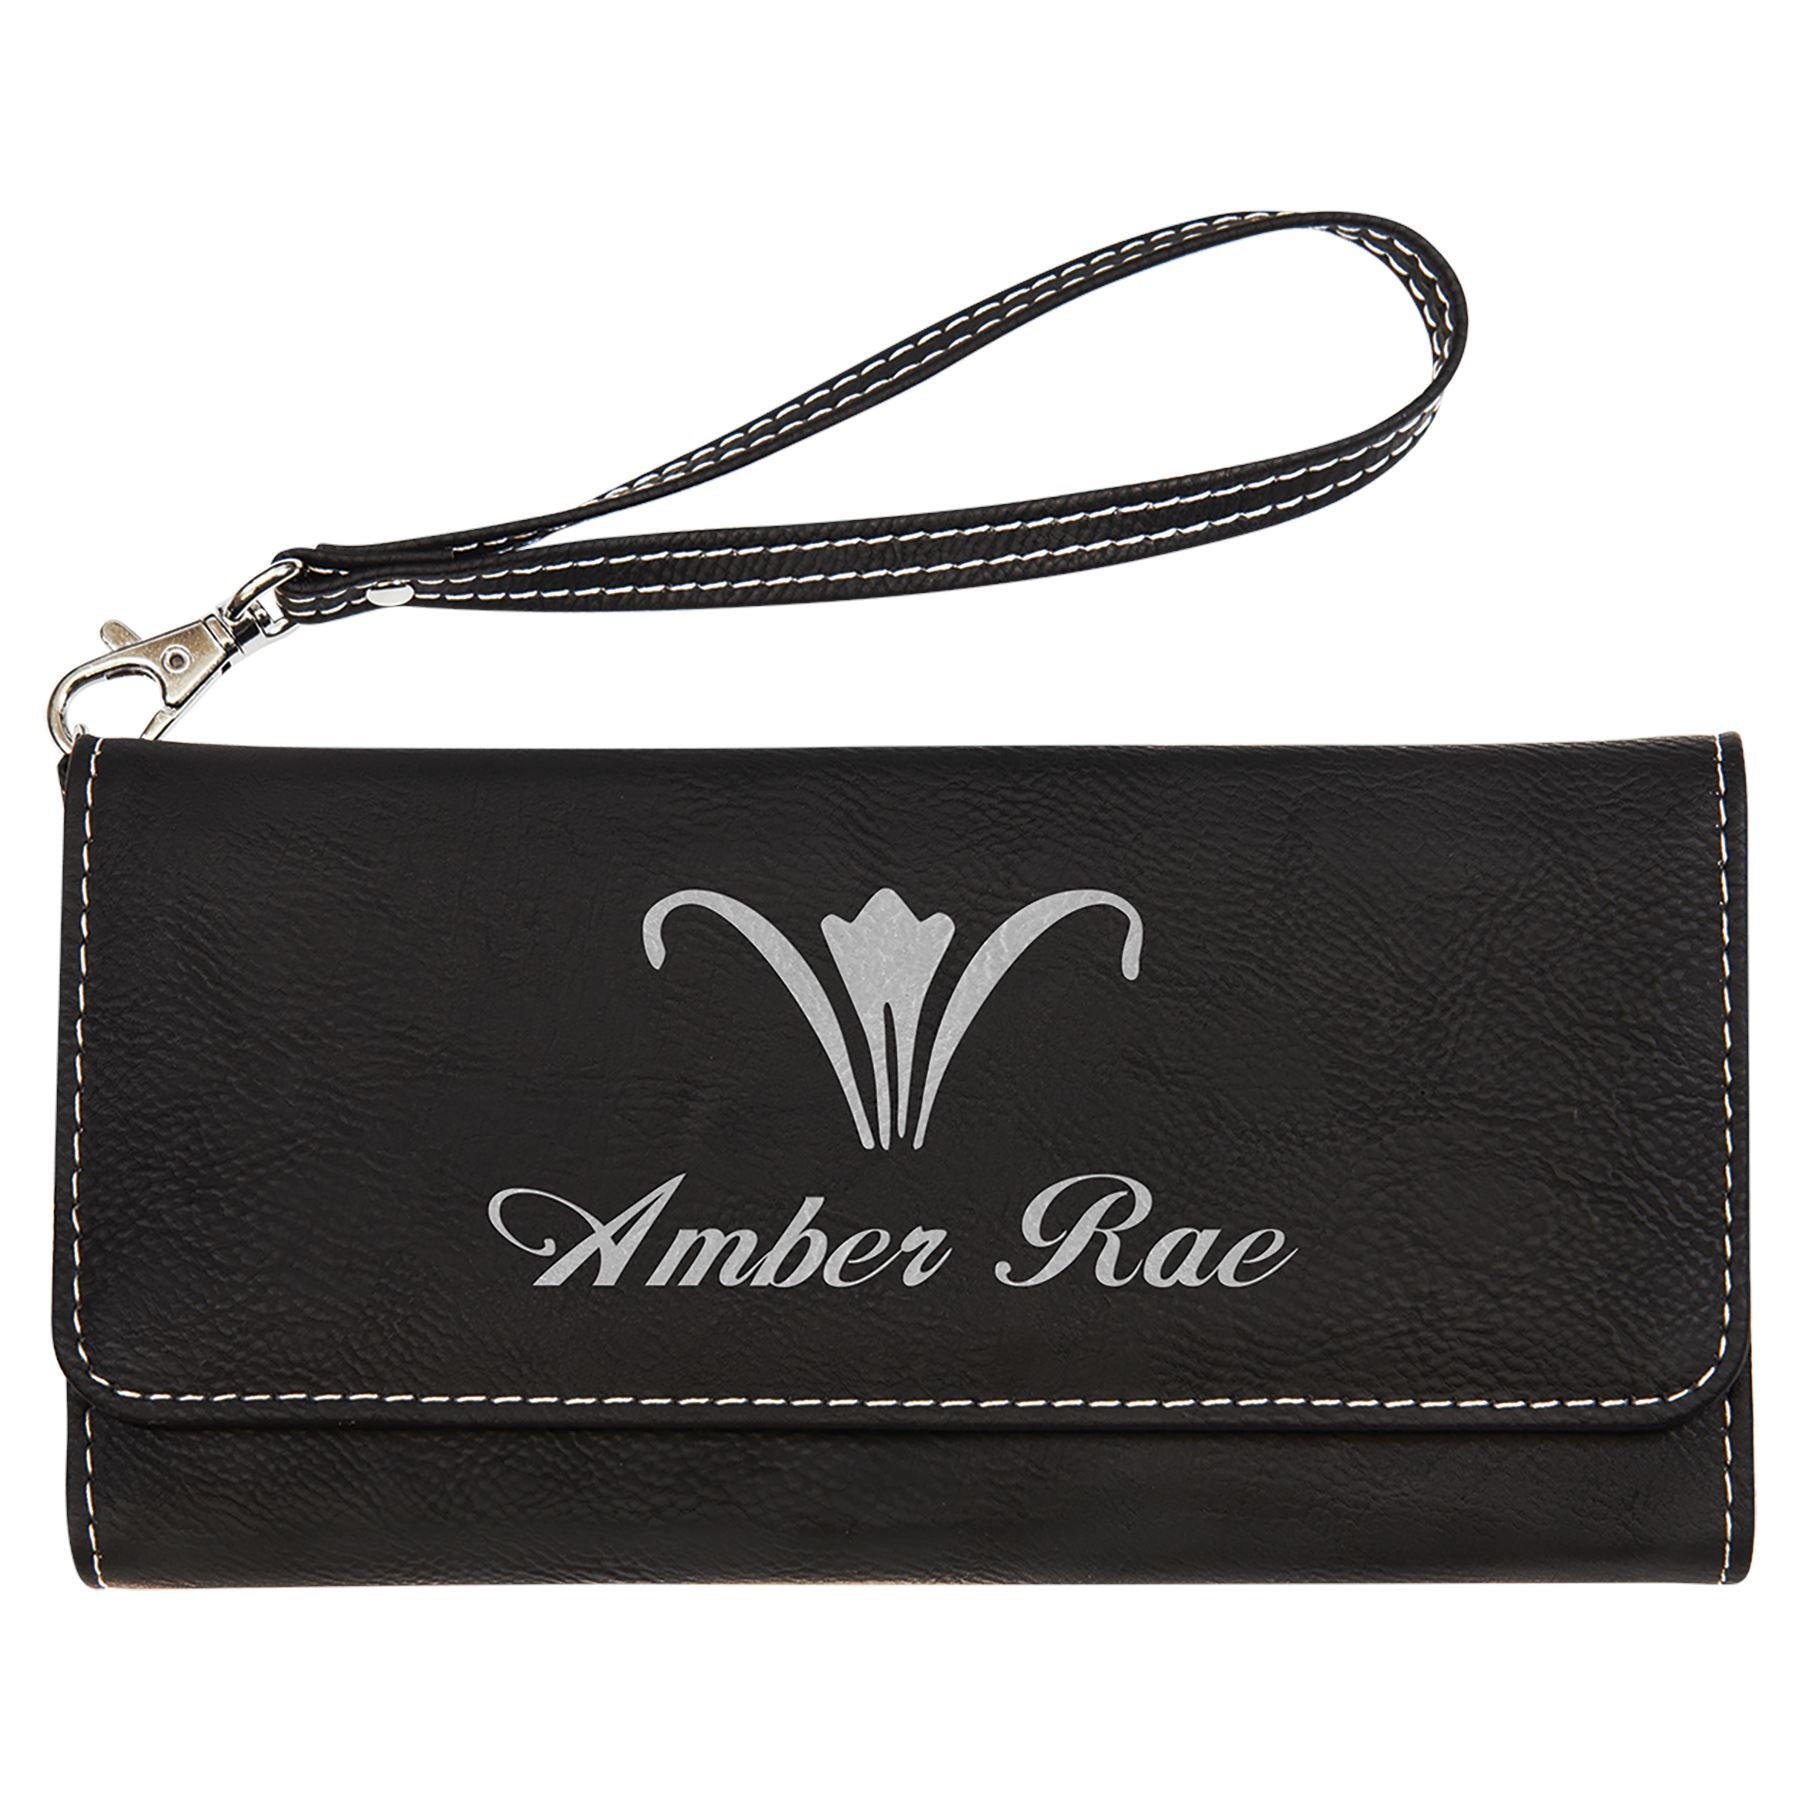 Wallet w/Strap, Laserable Leatherette, Laser Engraved Wallets Craftworks NW Black/Silver Front Only Small